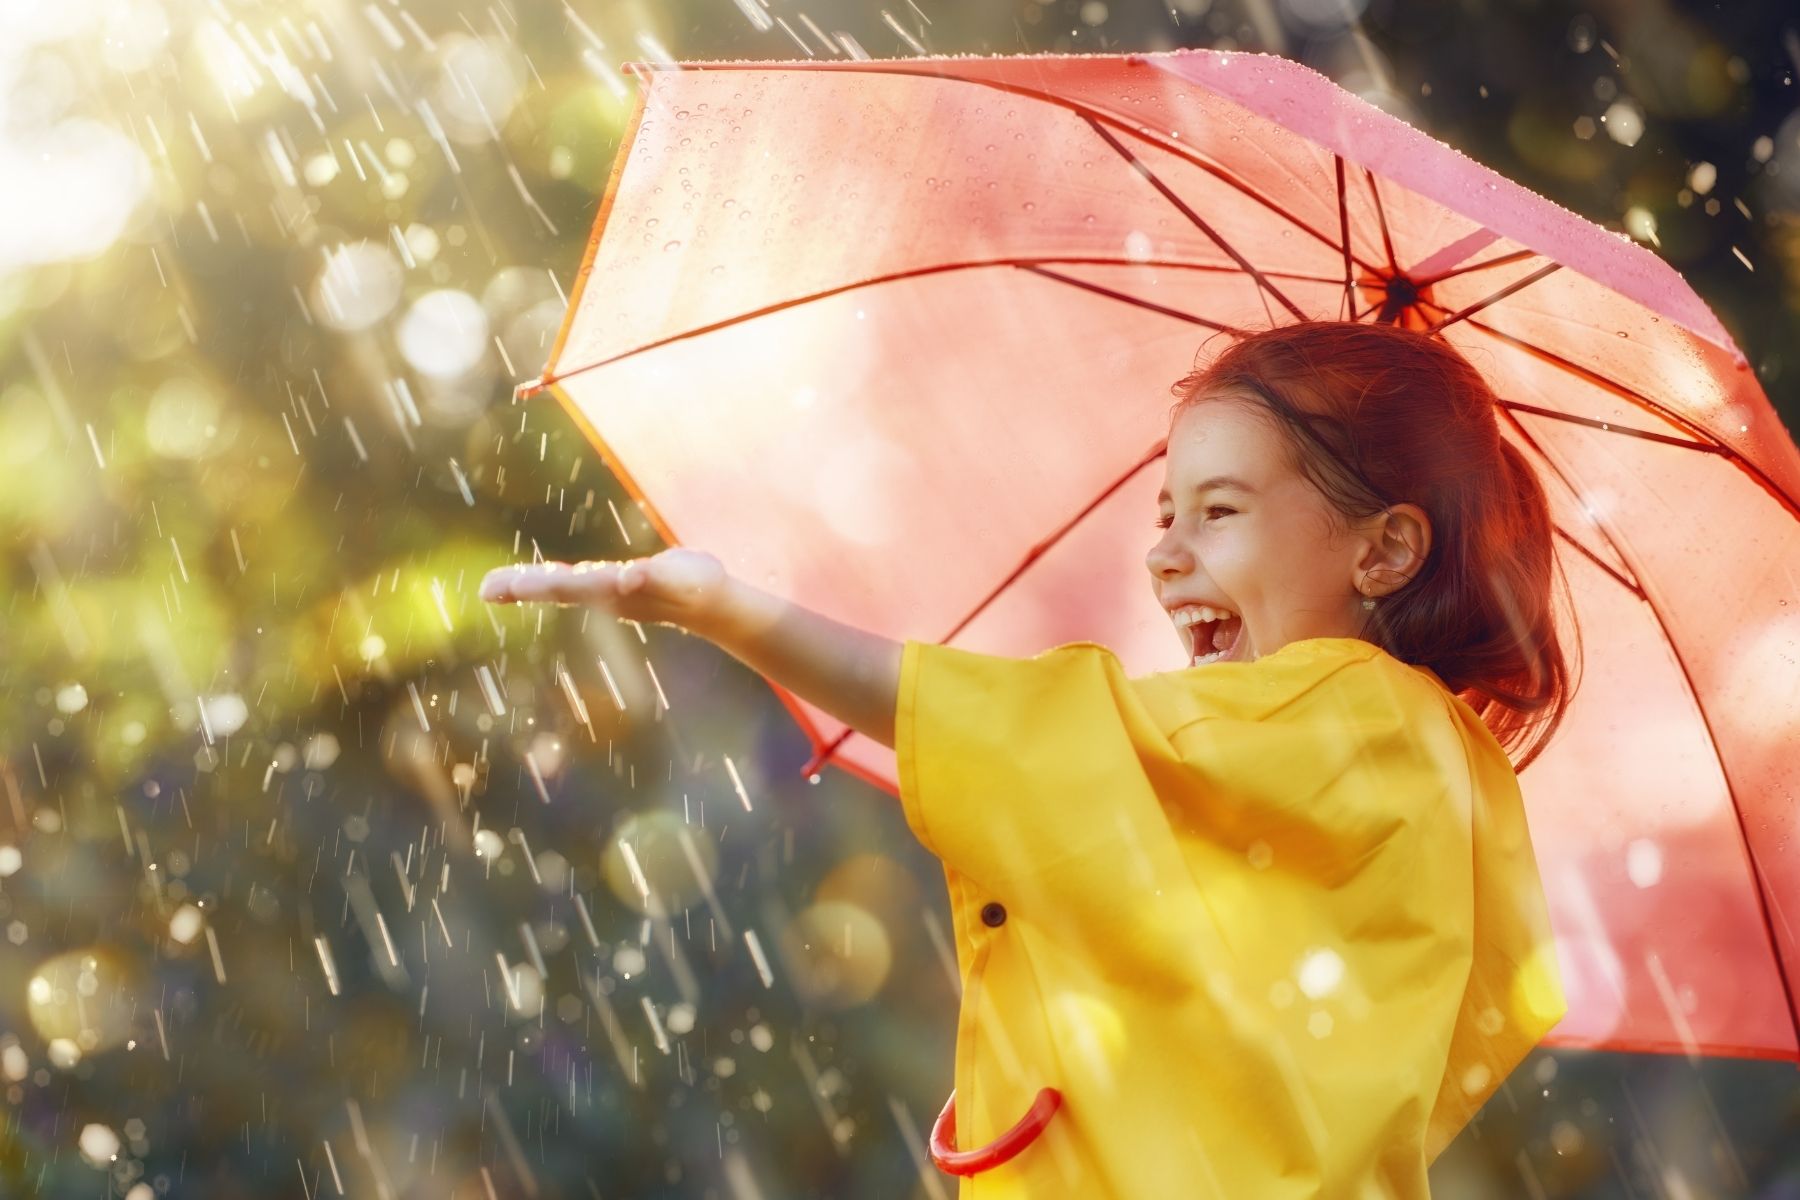 Photo of girl laughing under an umbrella in the rain